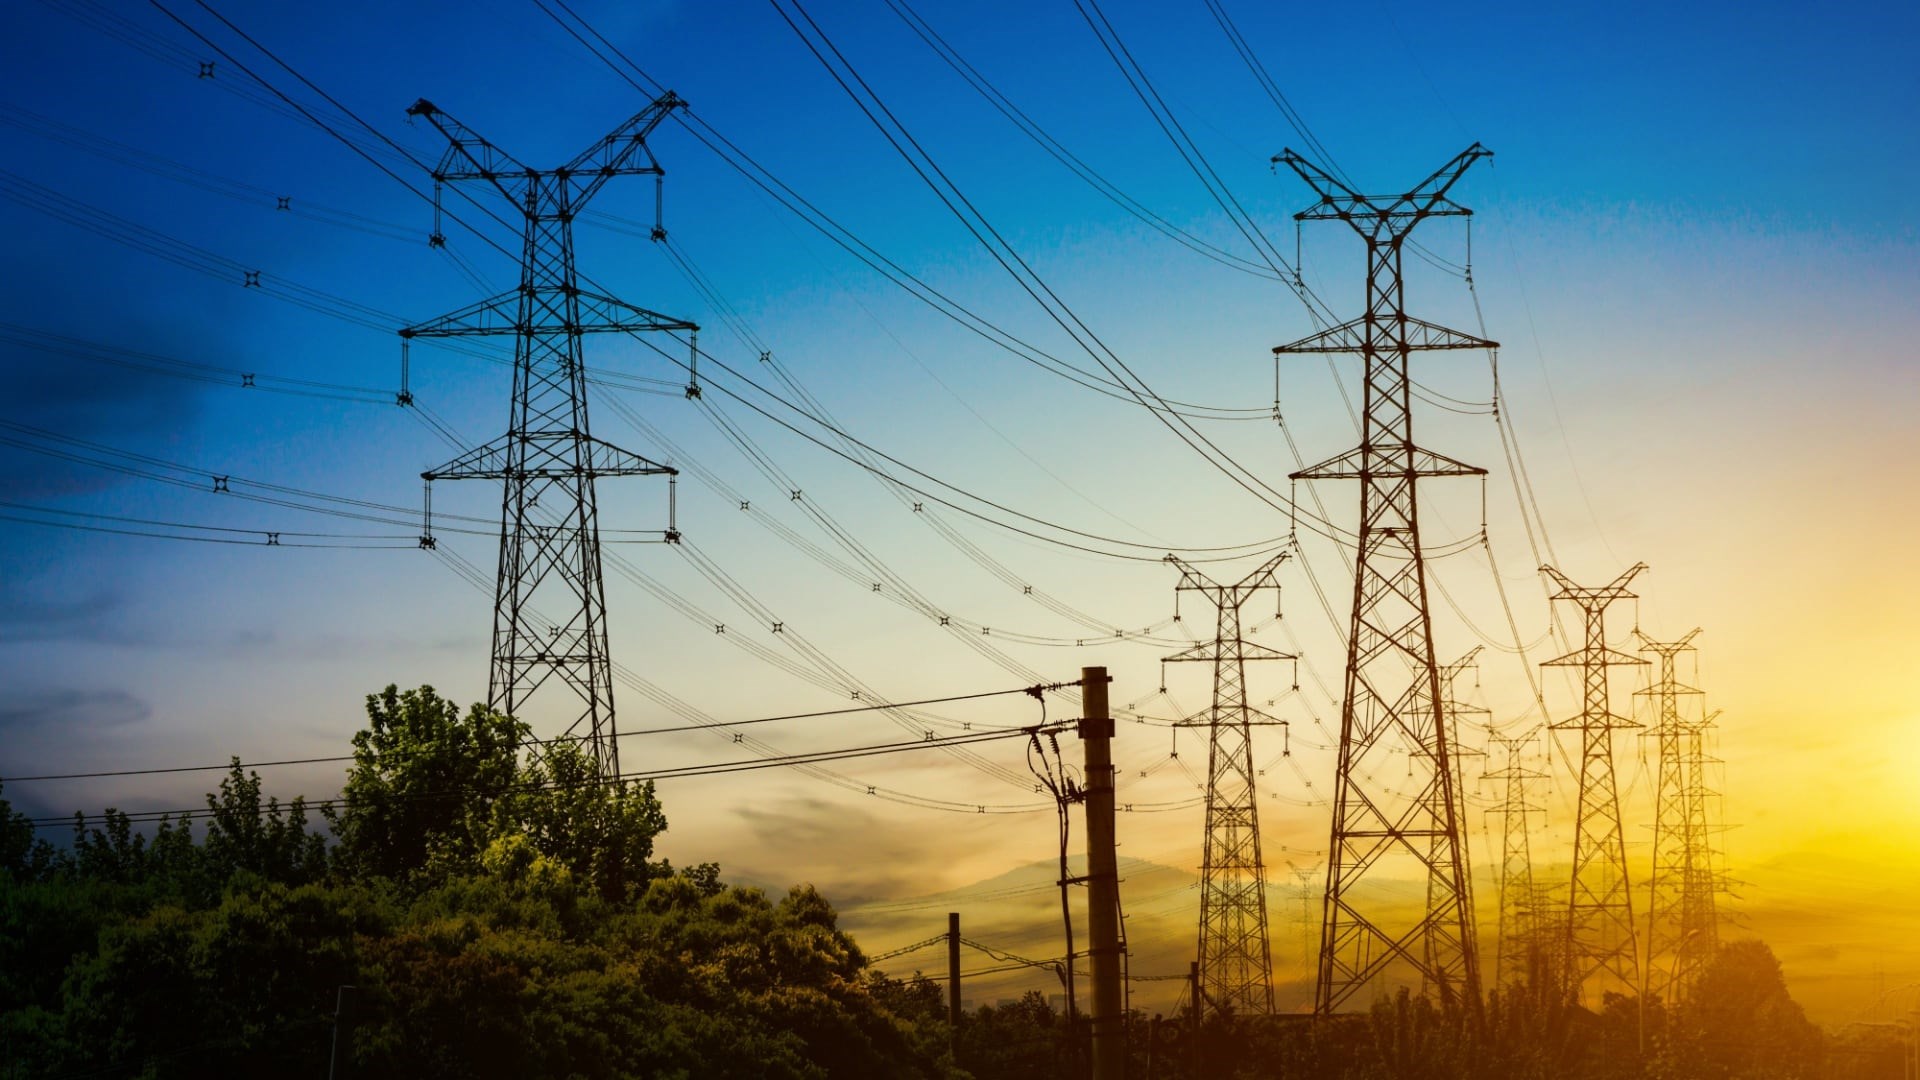 IPPs Warn: Reduction in Electricity Tariffs Could Deepen Power Sector Insolvency